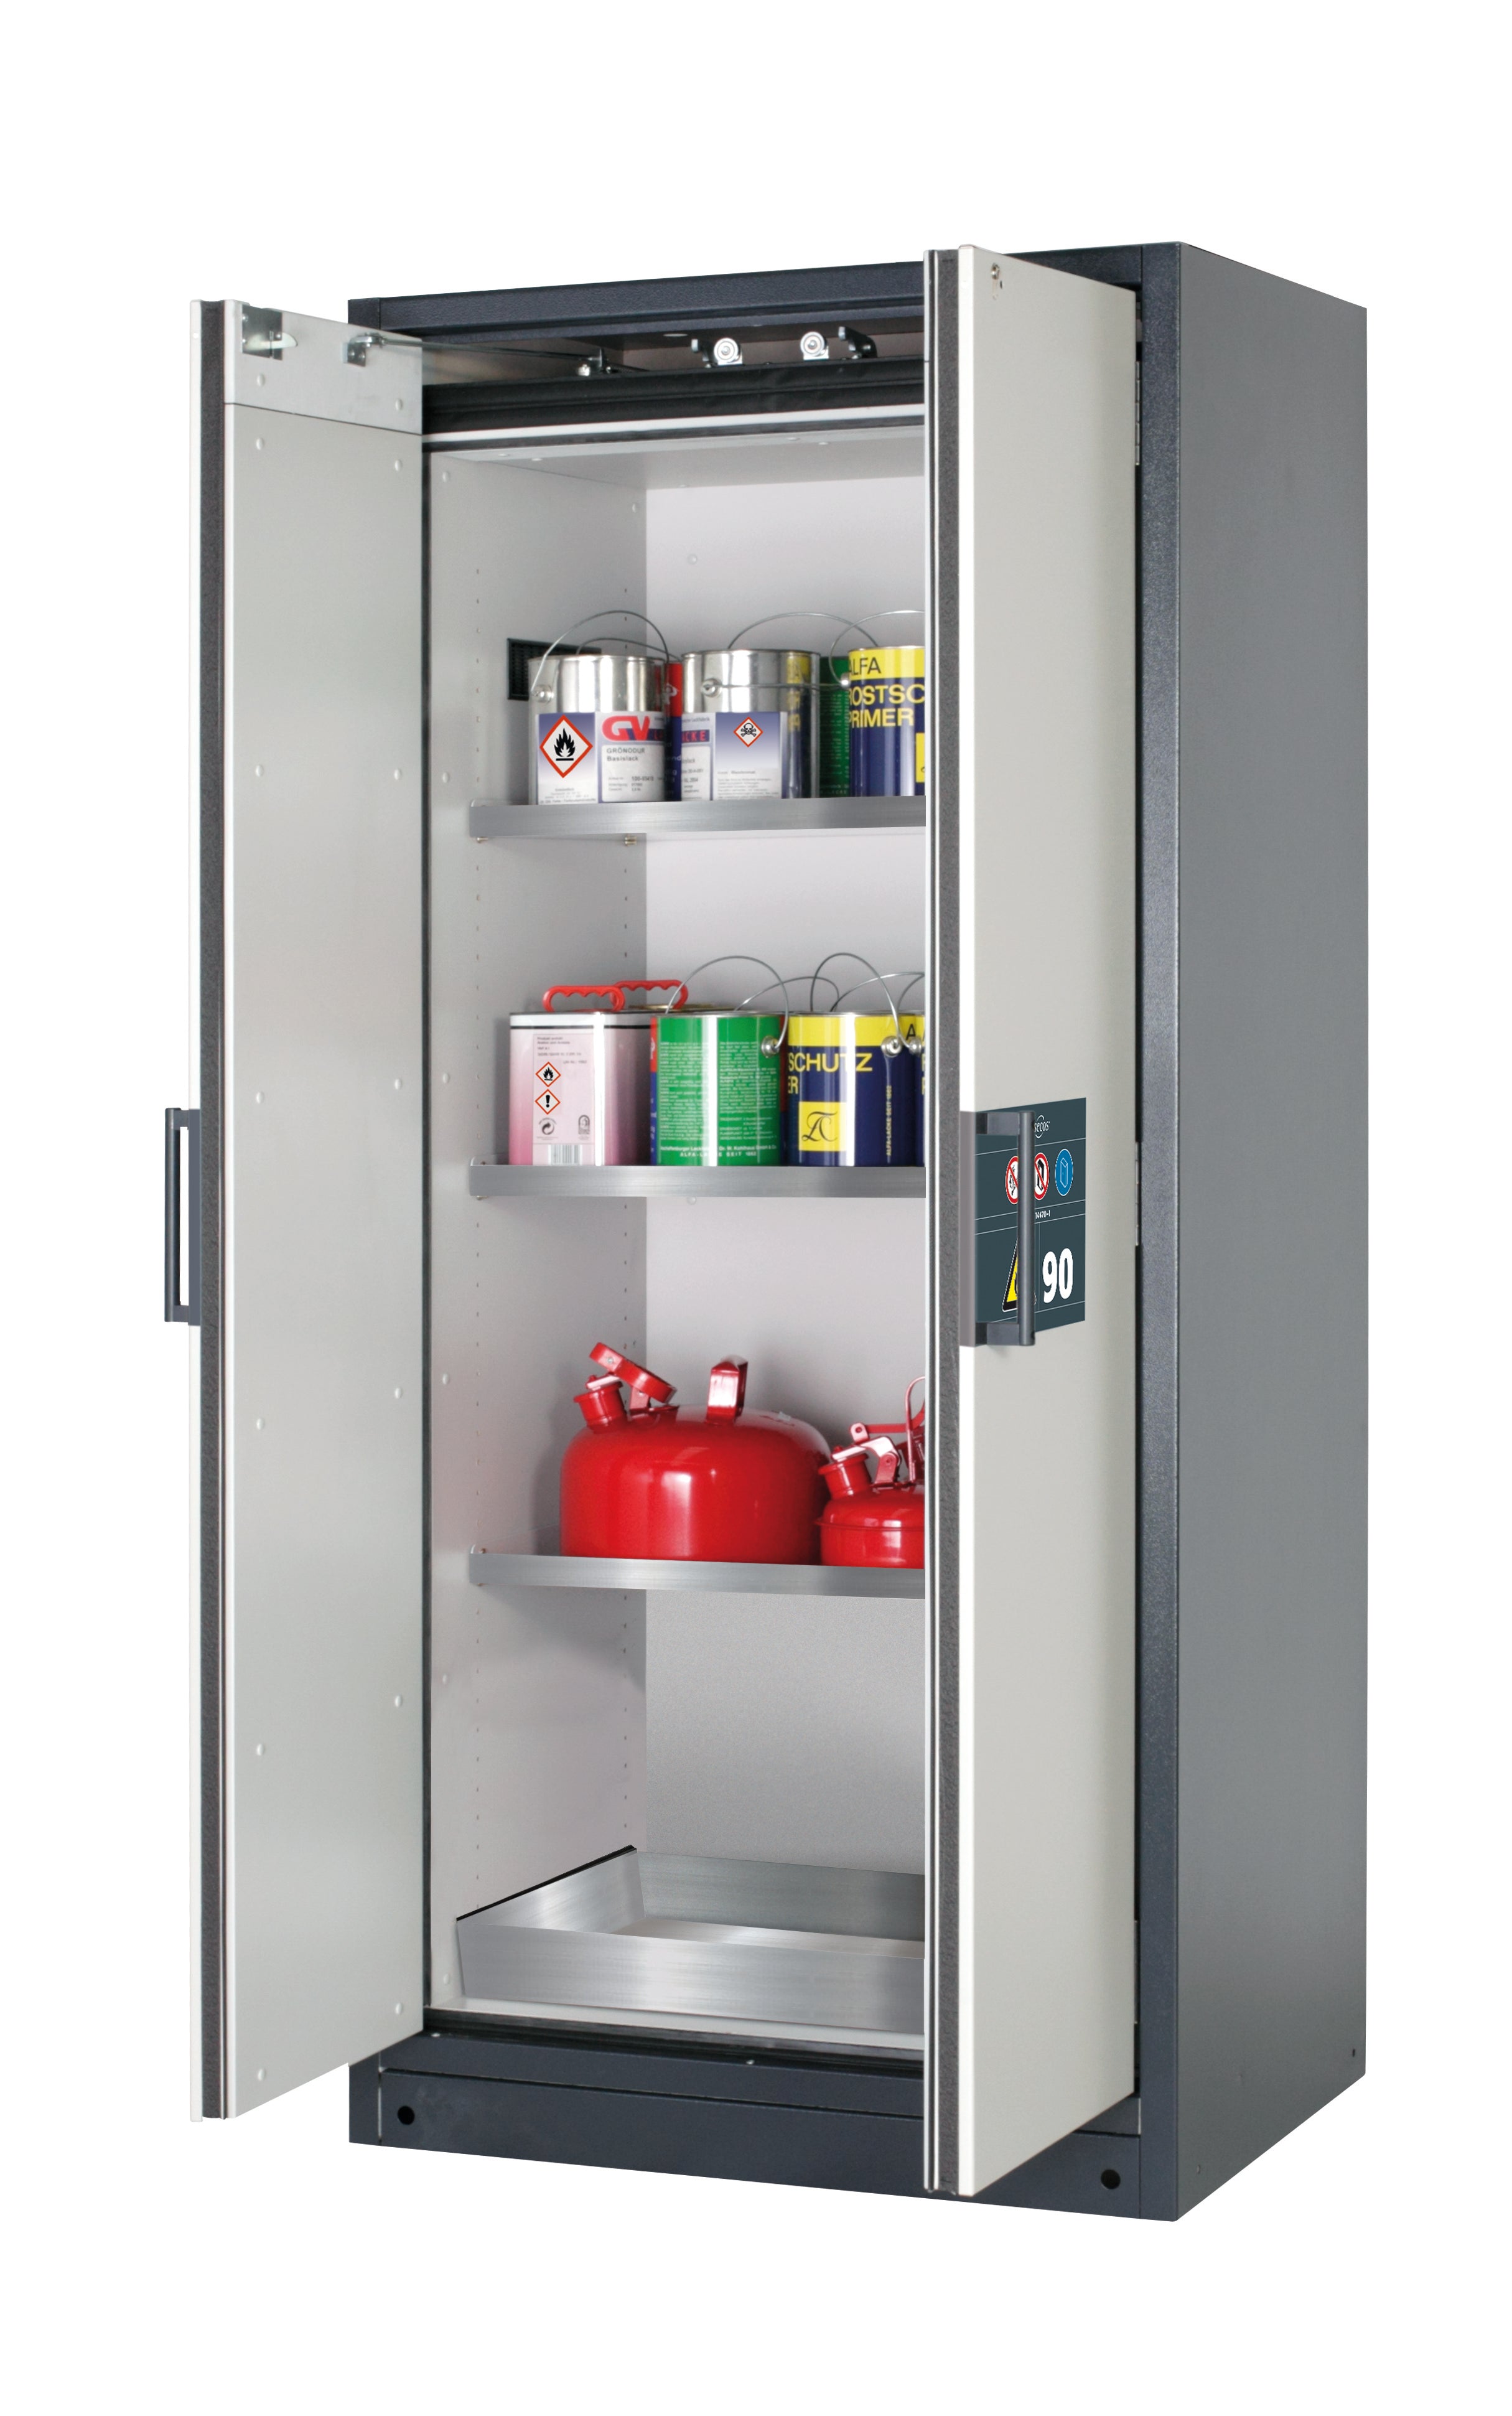 Type 90 safety storage cabinet Q-CLASSIC-90 model Q90.195.090 in light grey RAL 7035 with 3x shelf standard (stainless steel 1.4301),